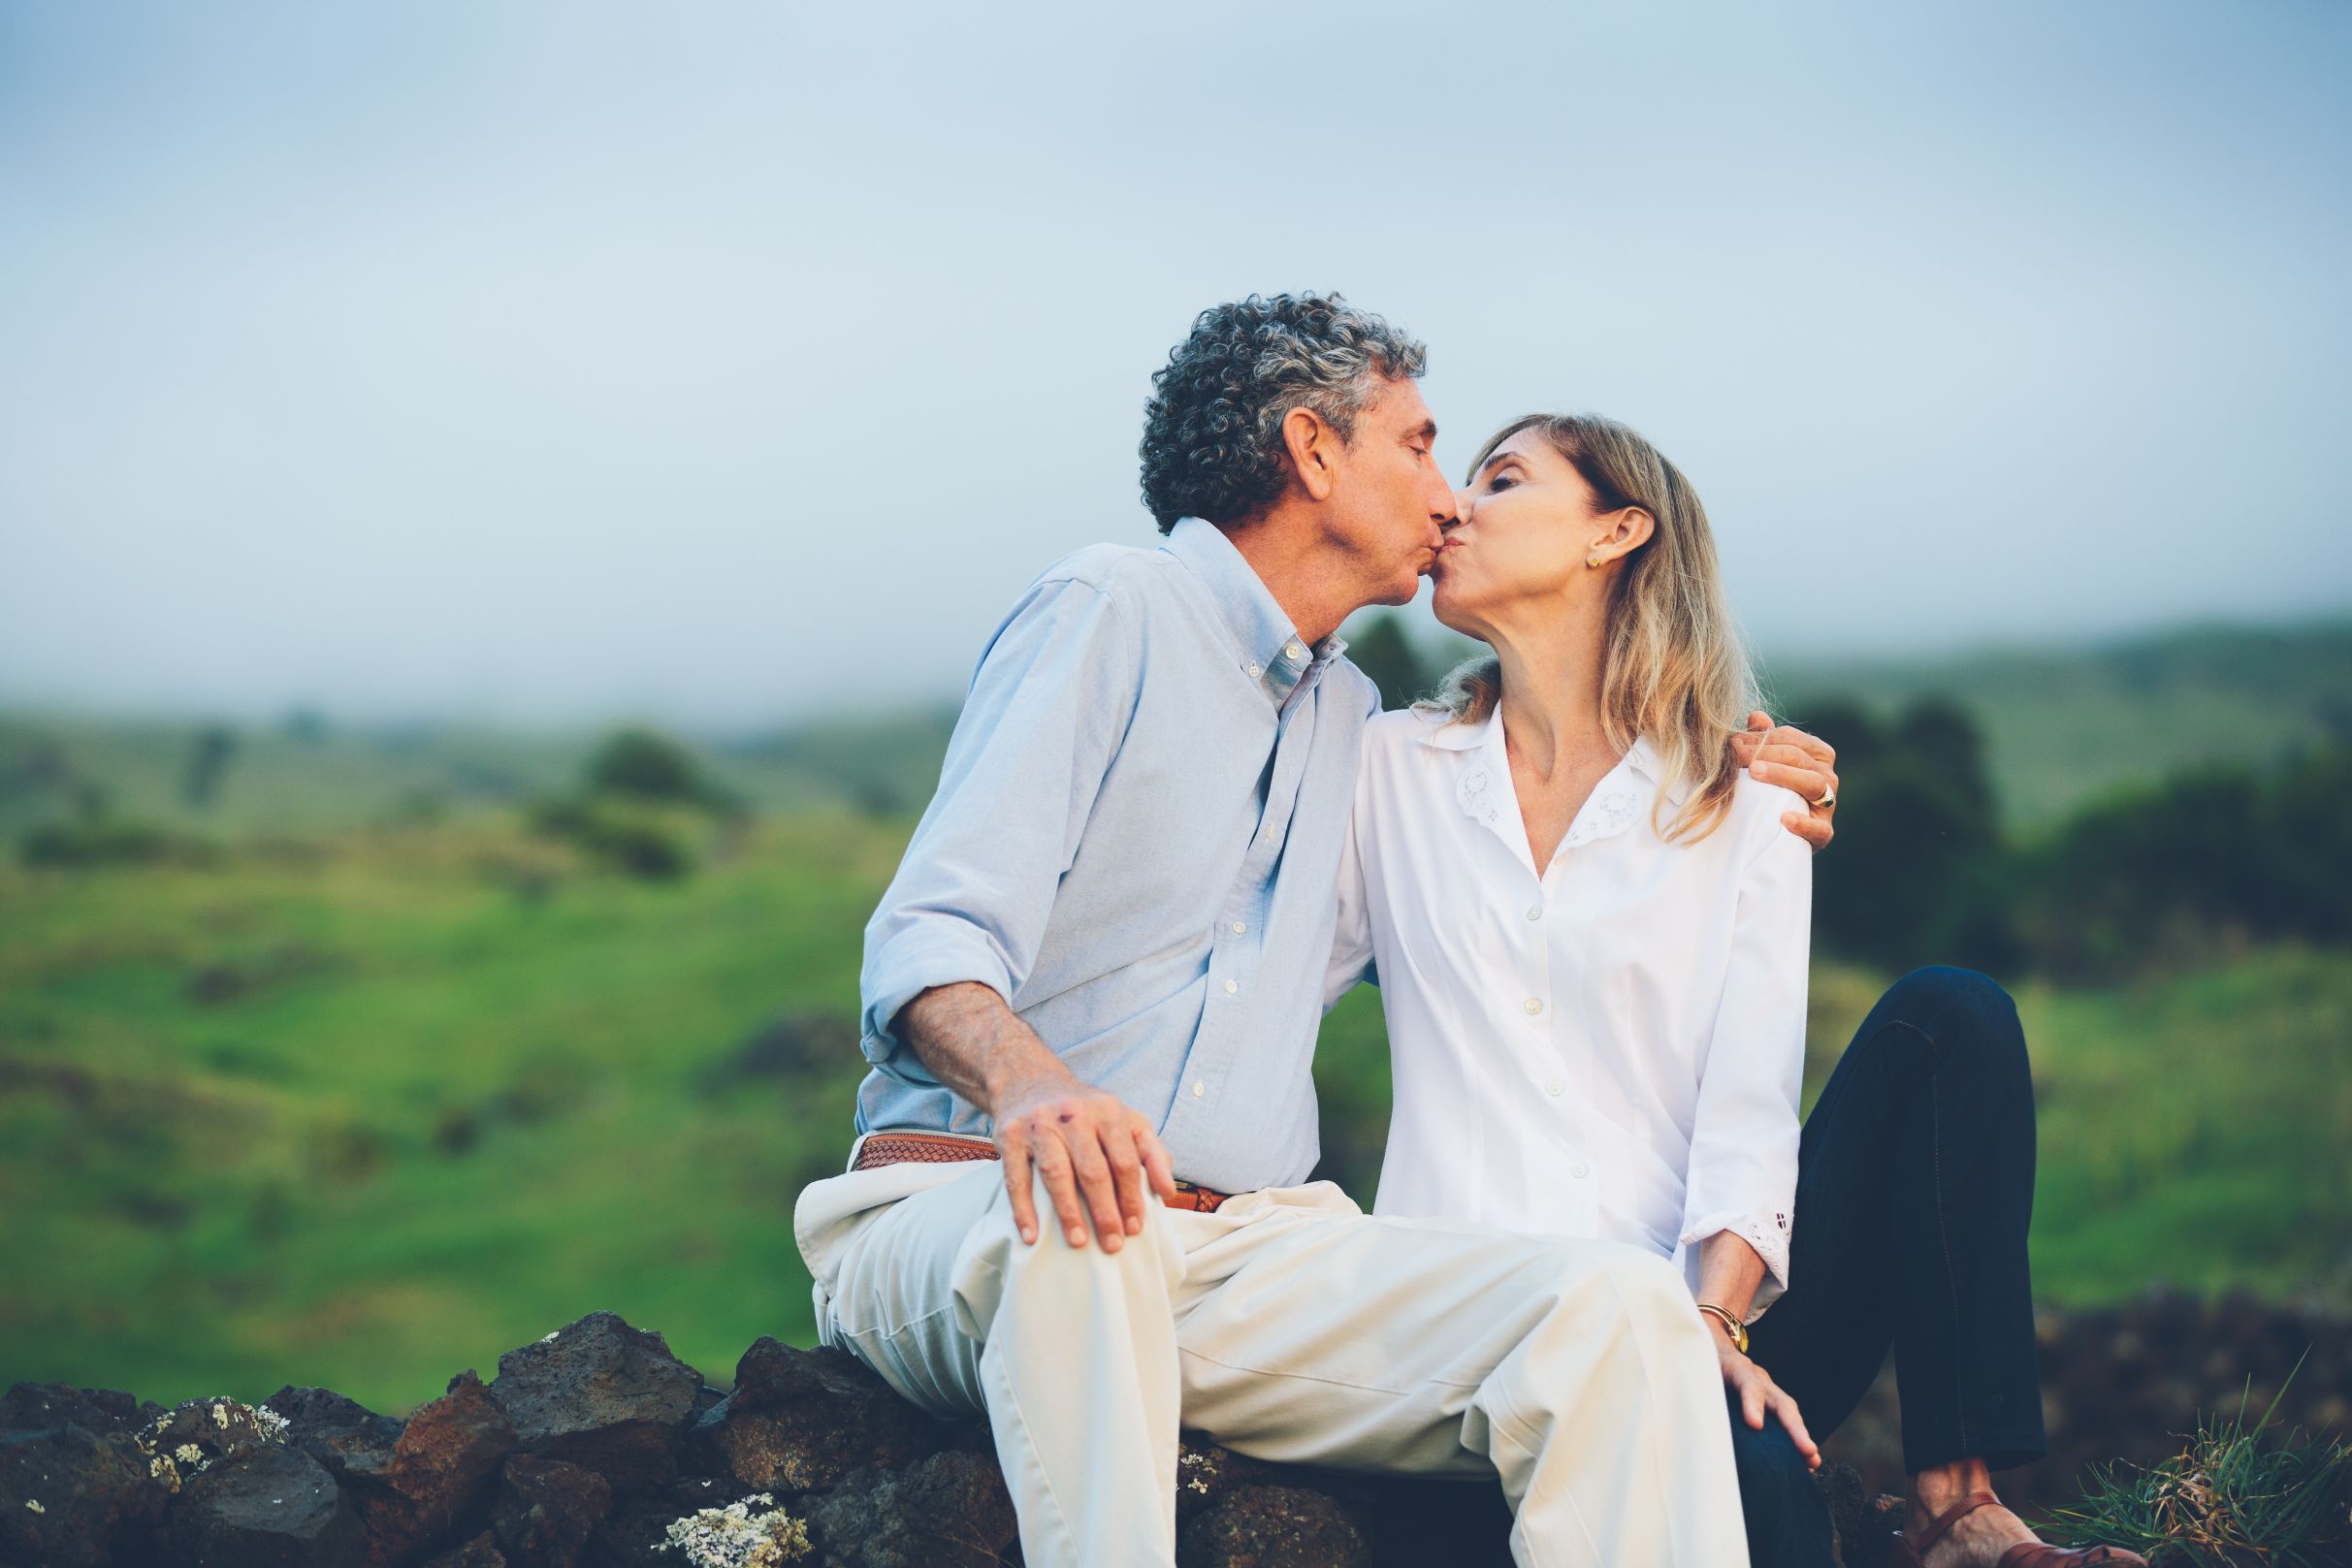 Couple sitting on a stone wall in green field and kissing